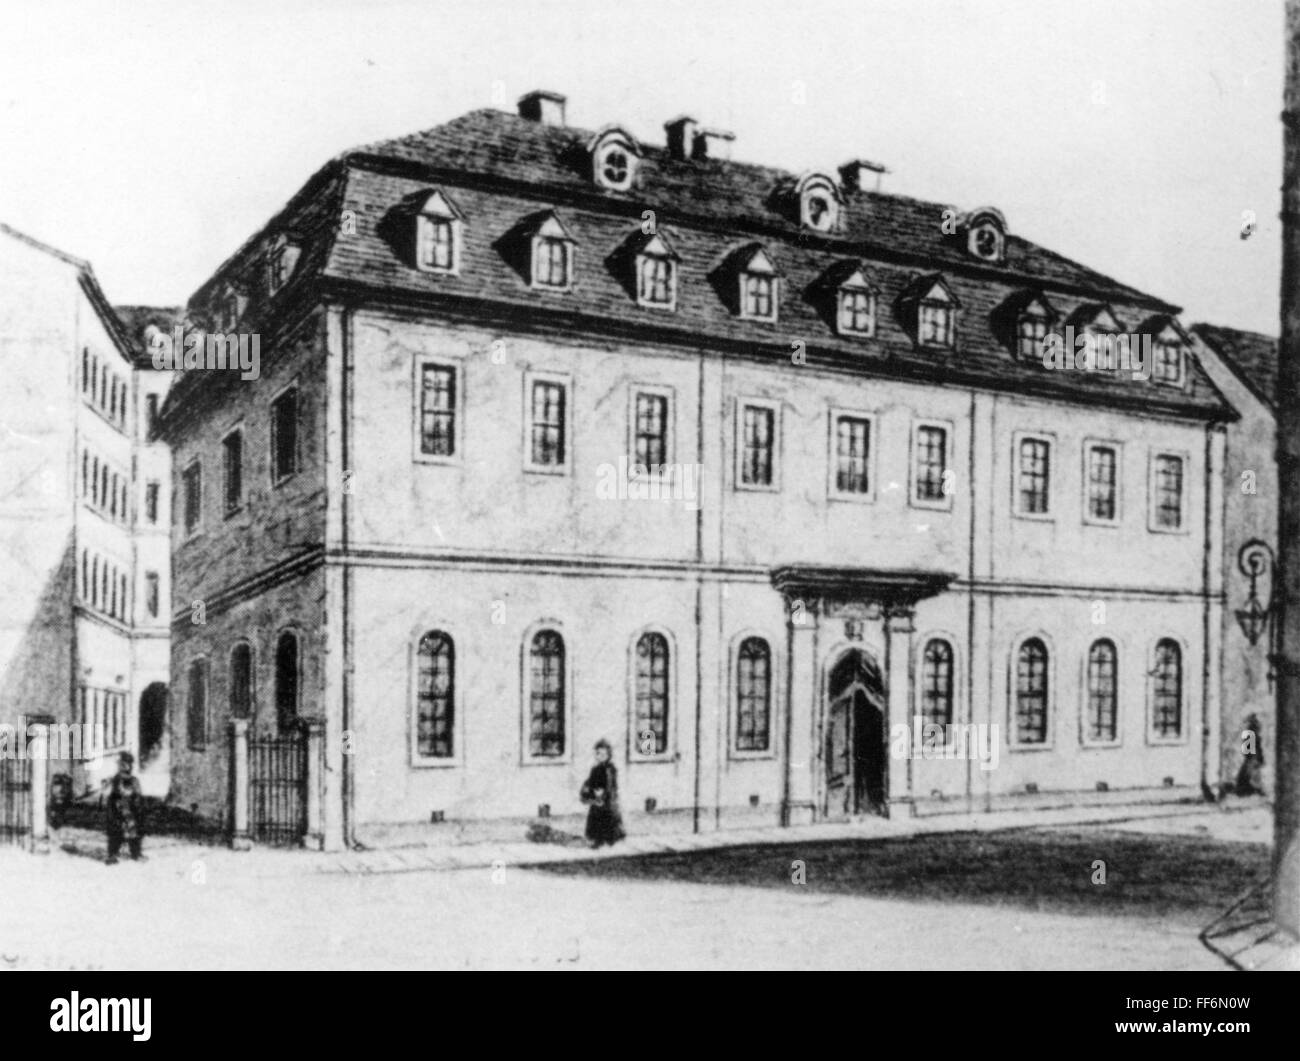 geography / travel, Germany, Leipzig, buildings, university, exterior view, Petrinum with legal faculty, drawing, 19th century, 19th century, graphic, graphics, law, jurisprudence, Saxony, East Germany, Eastern Germany, Germany, Central Europe, Europe, architecture, building, buildings, university, universities, faculty, department, faculties, departments, law school, historic, historical, people, Additional-Rights-Clearences-Not Available Stock Photo